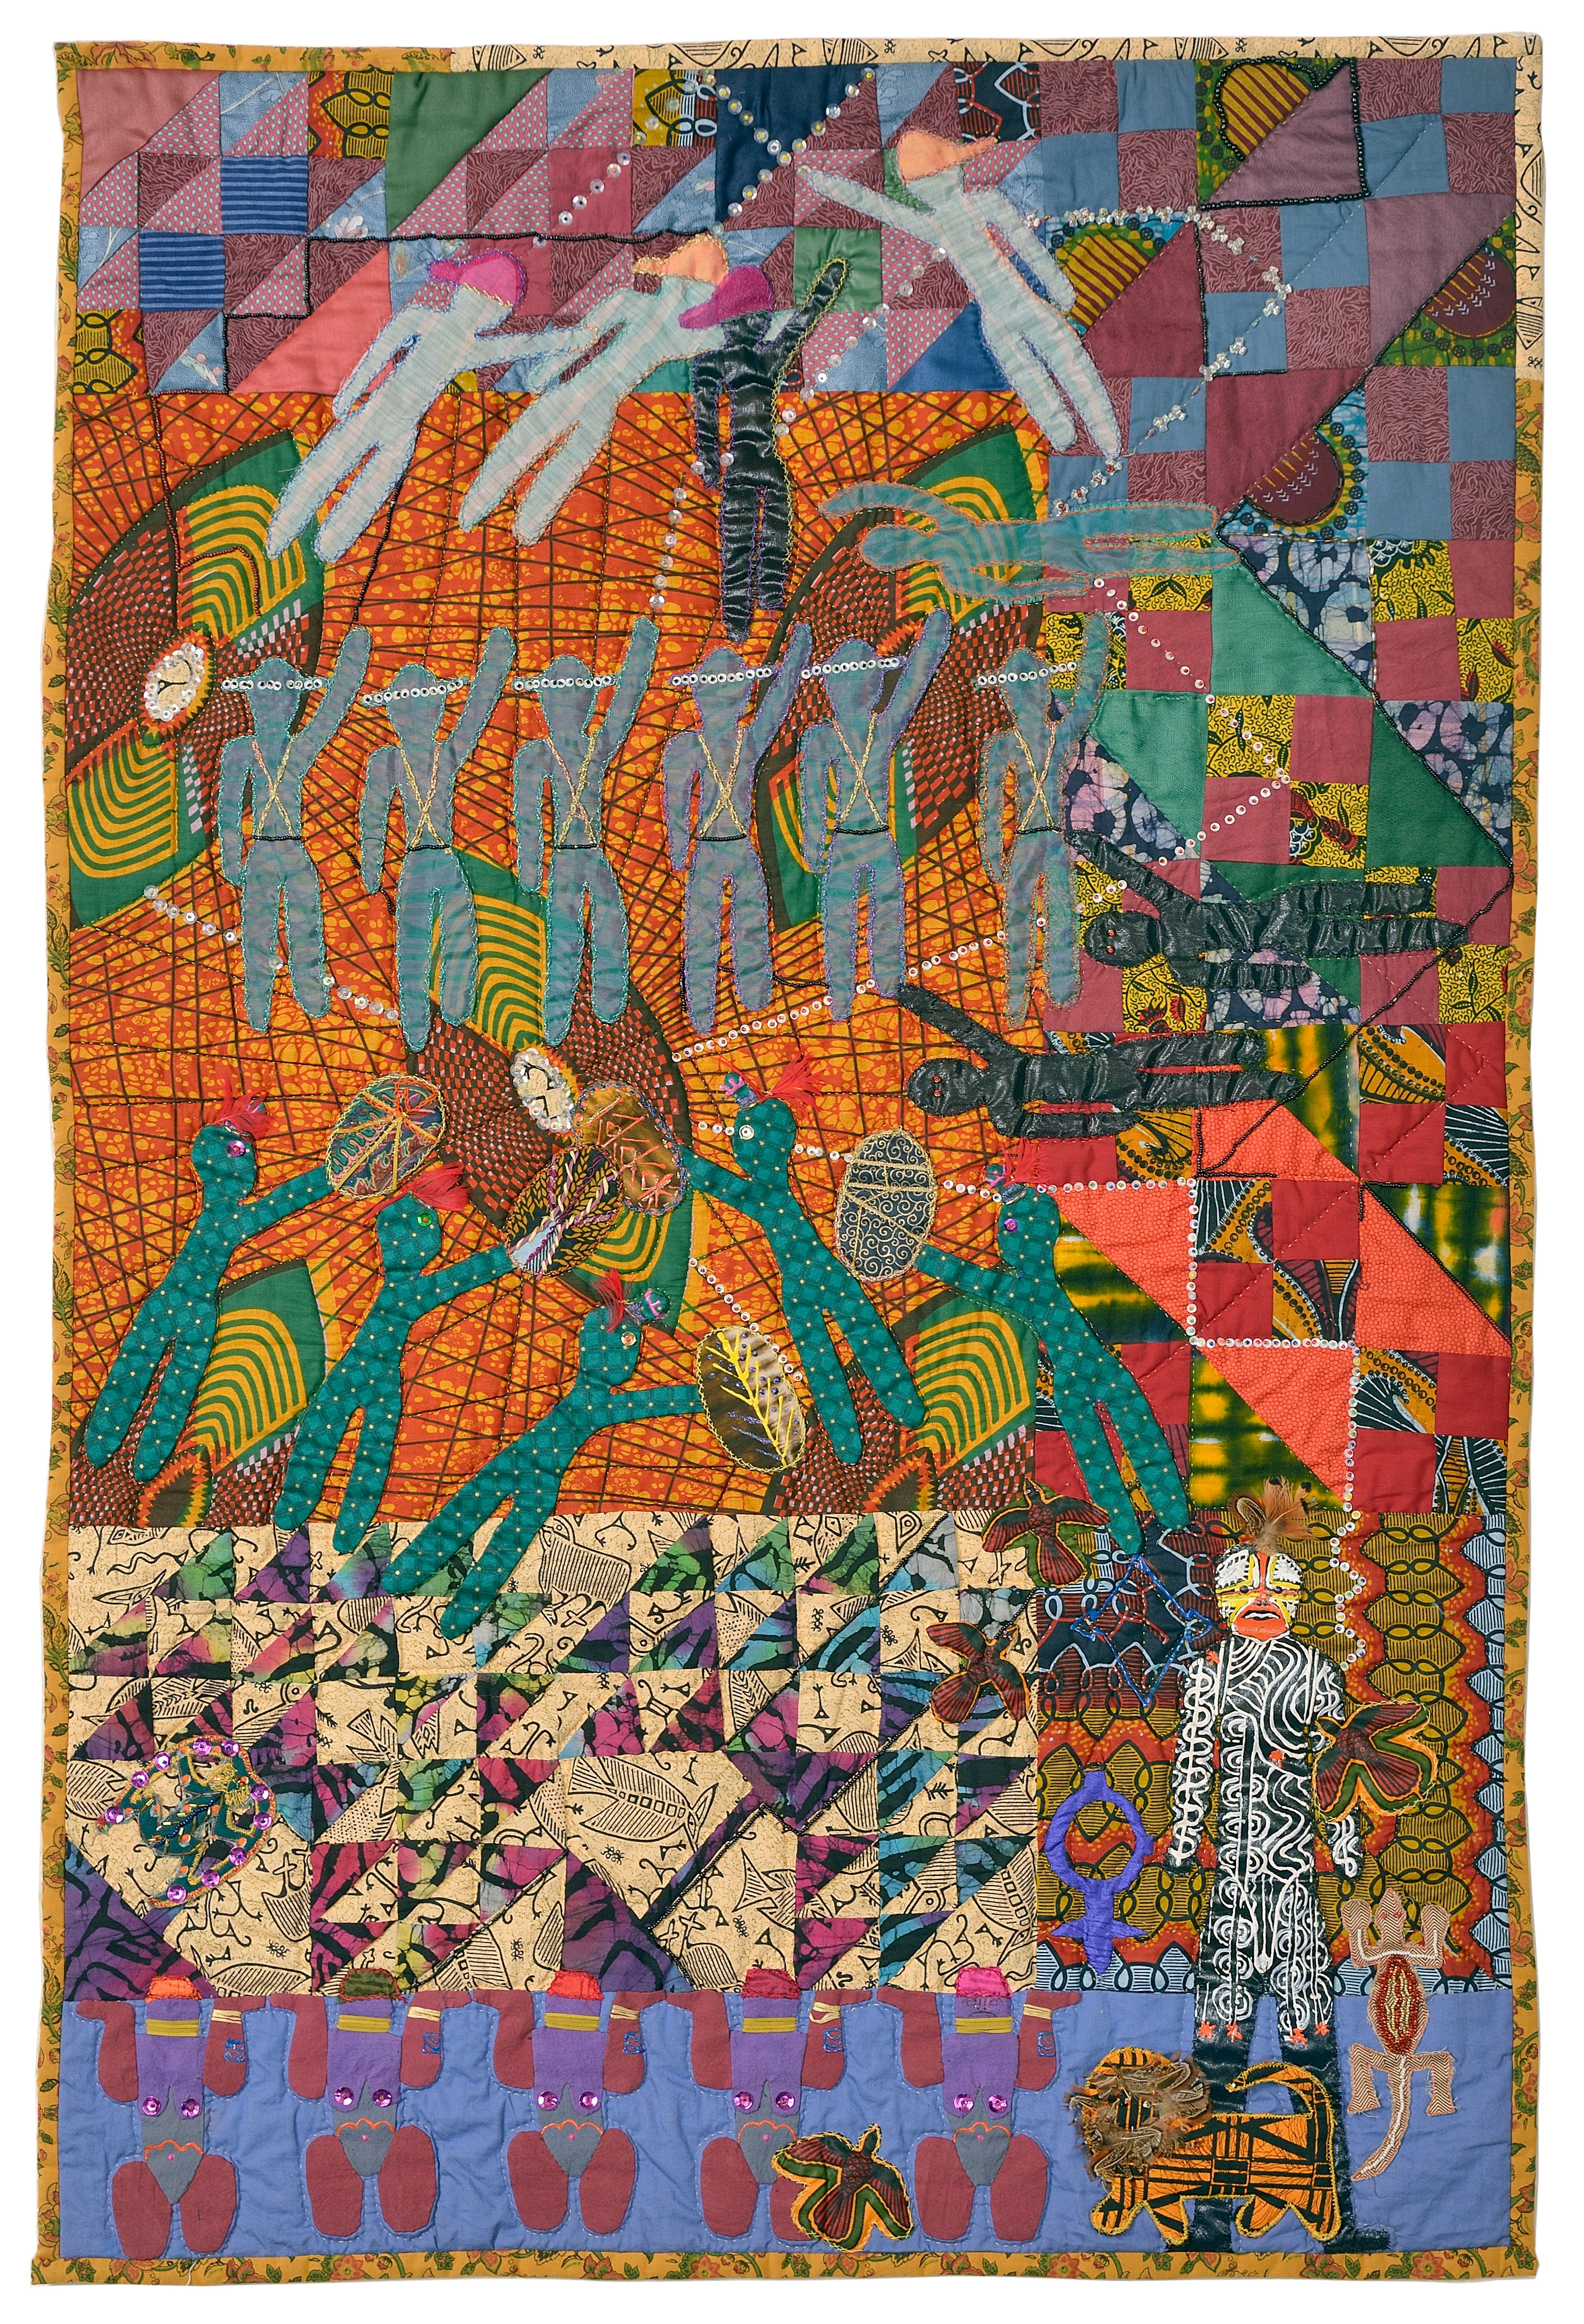 Multicolor and multi-patterned quilt with figures and shapes